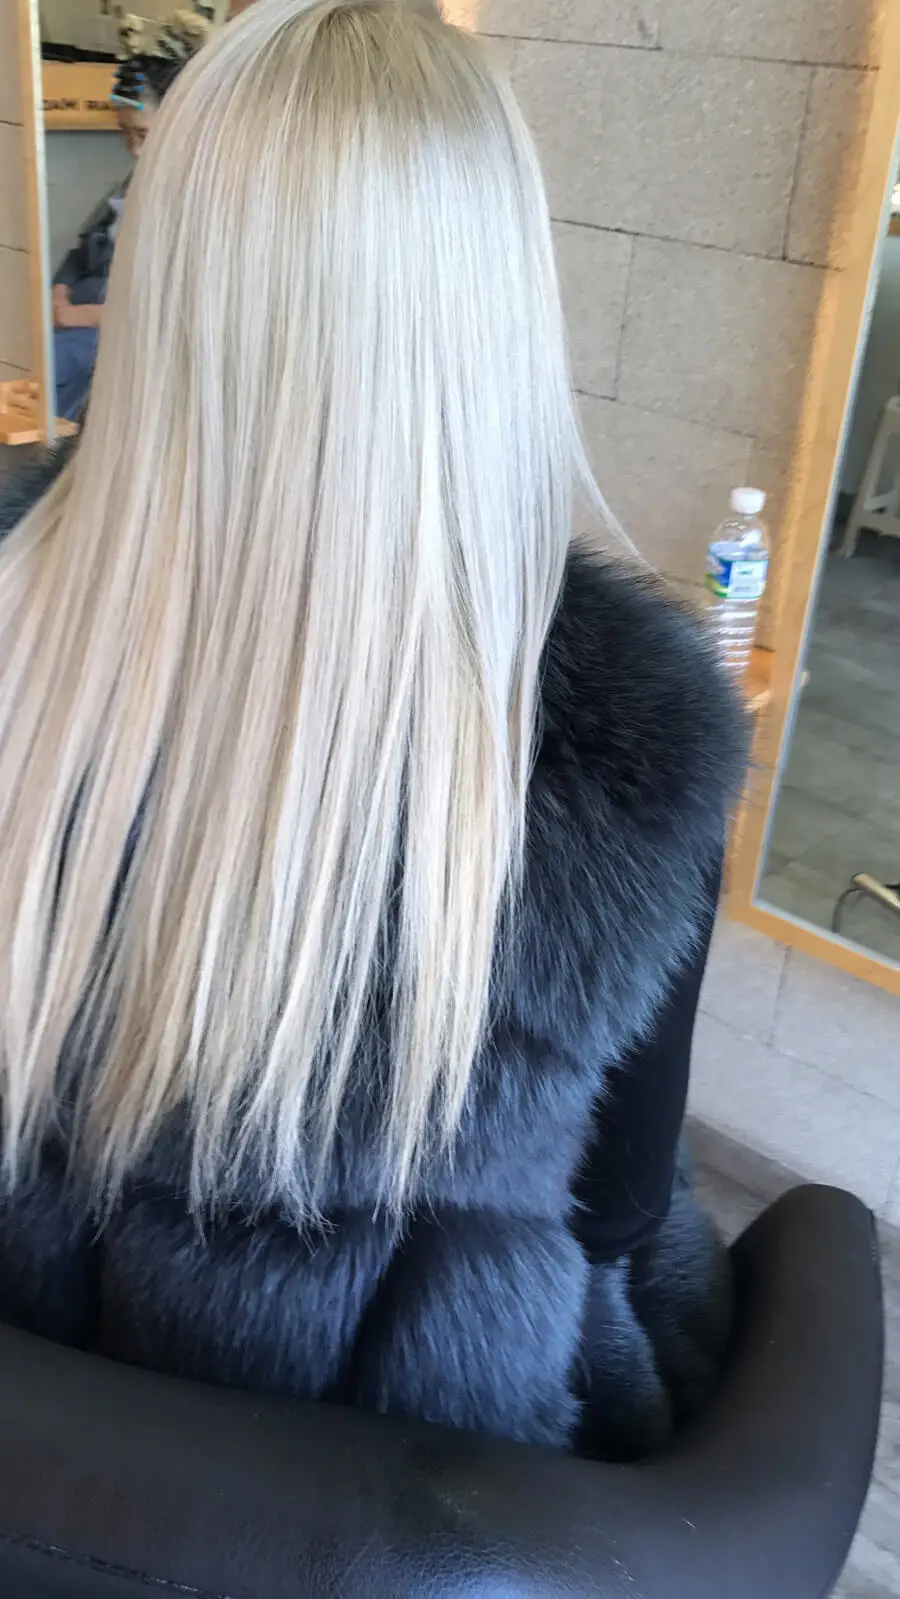 Can you get your hair whitegray without bleach or dye